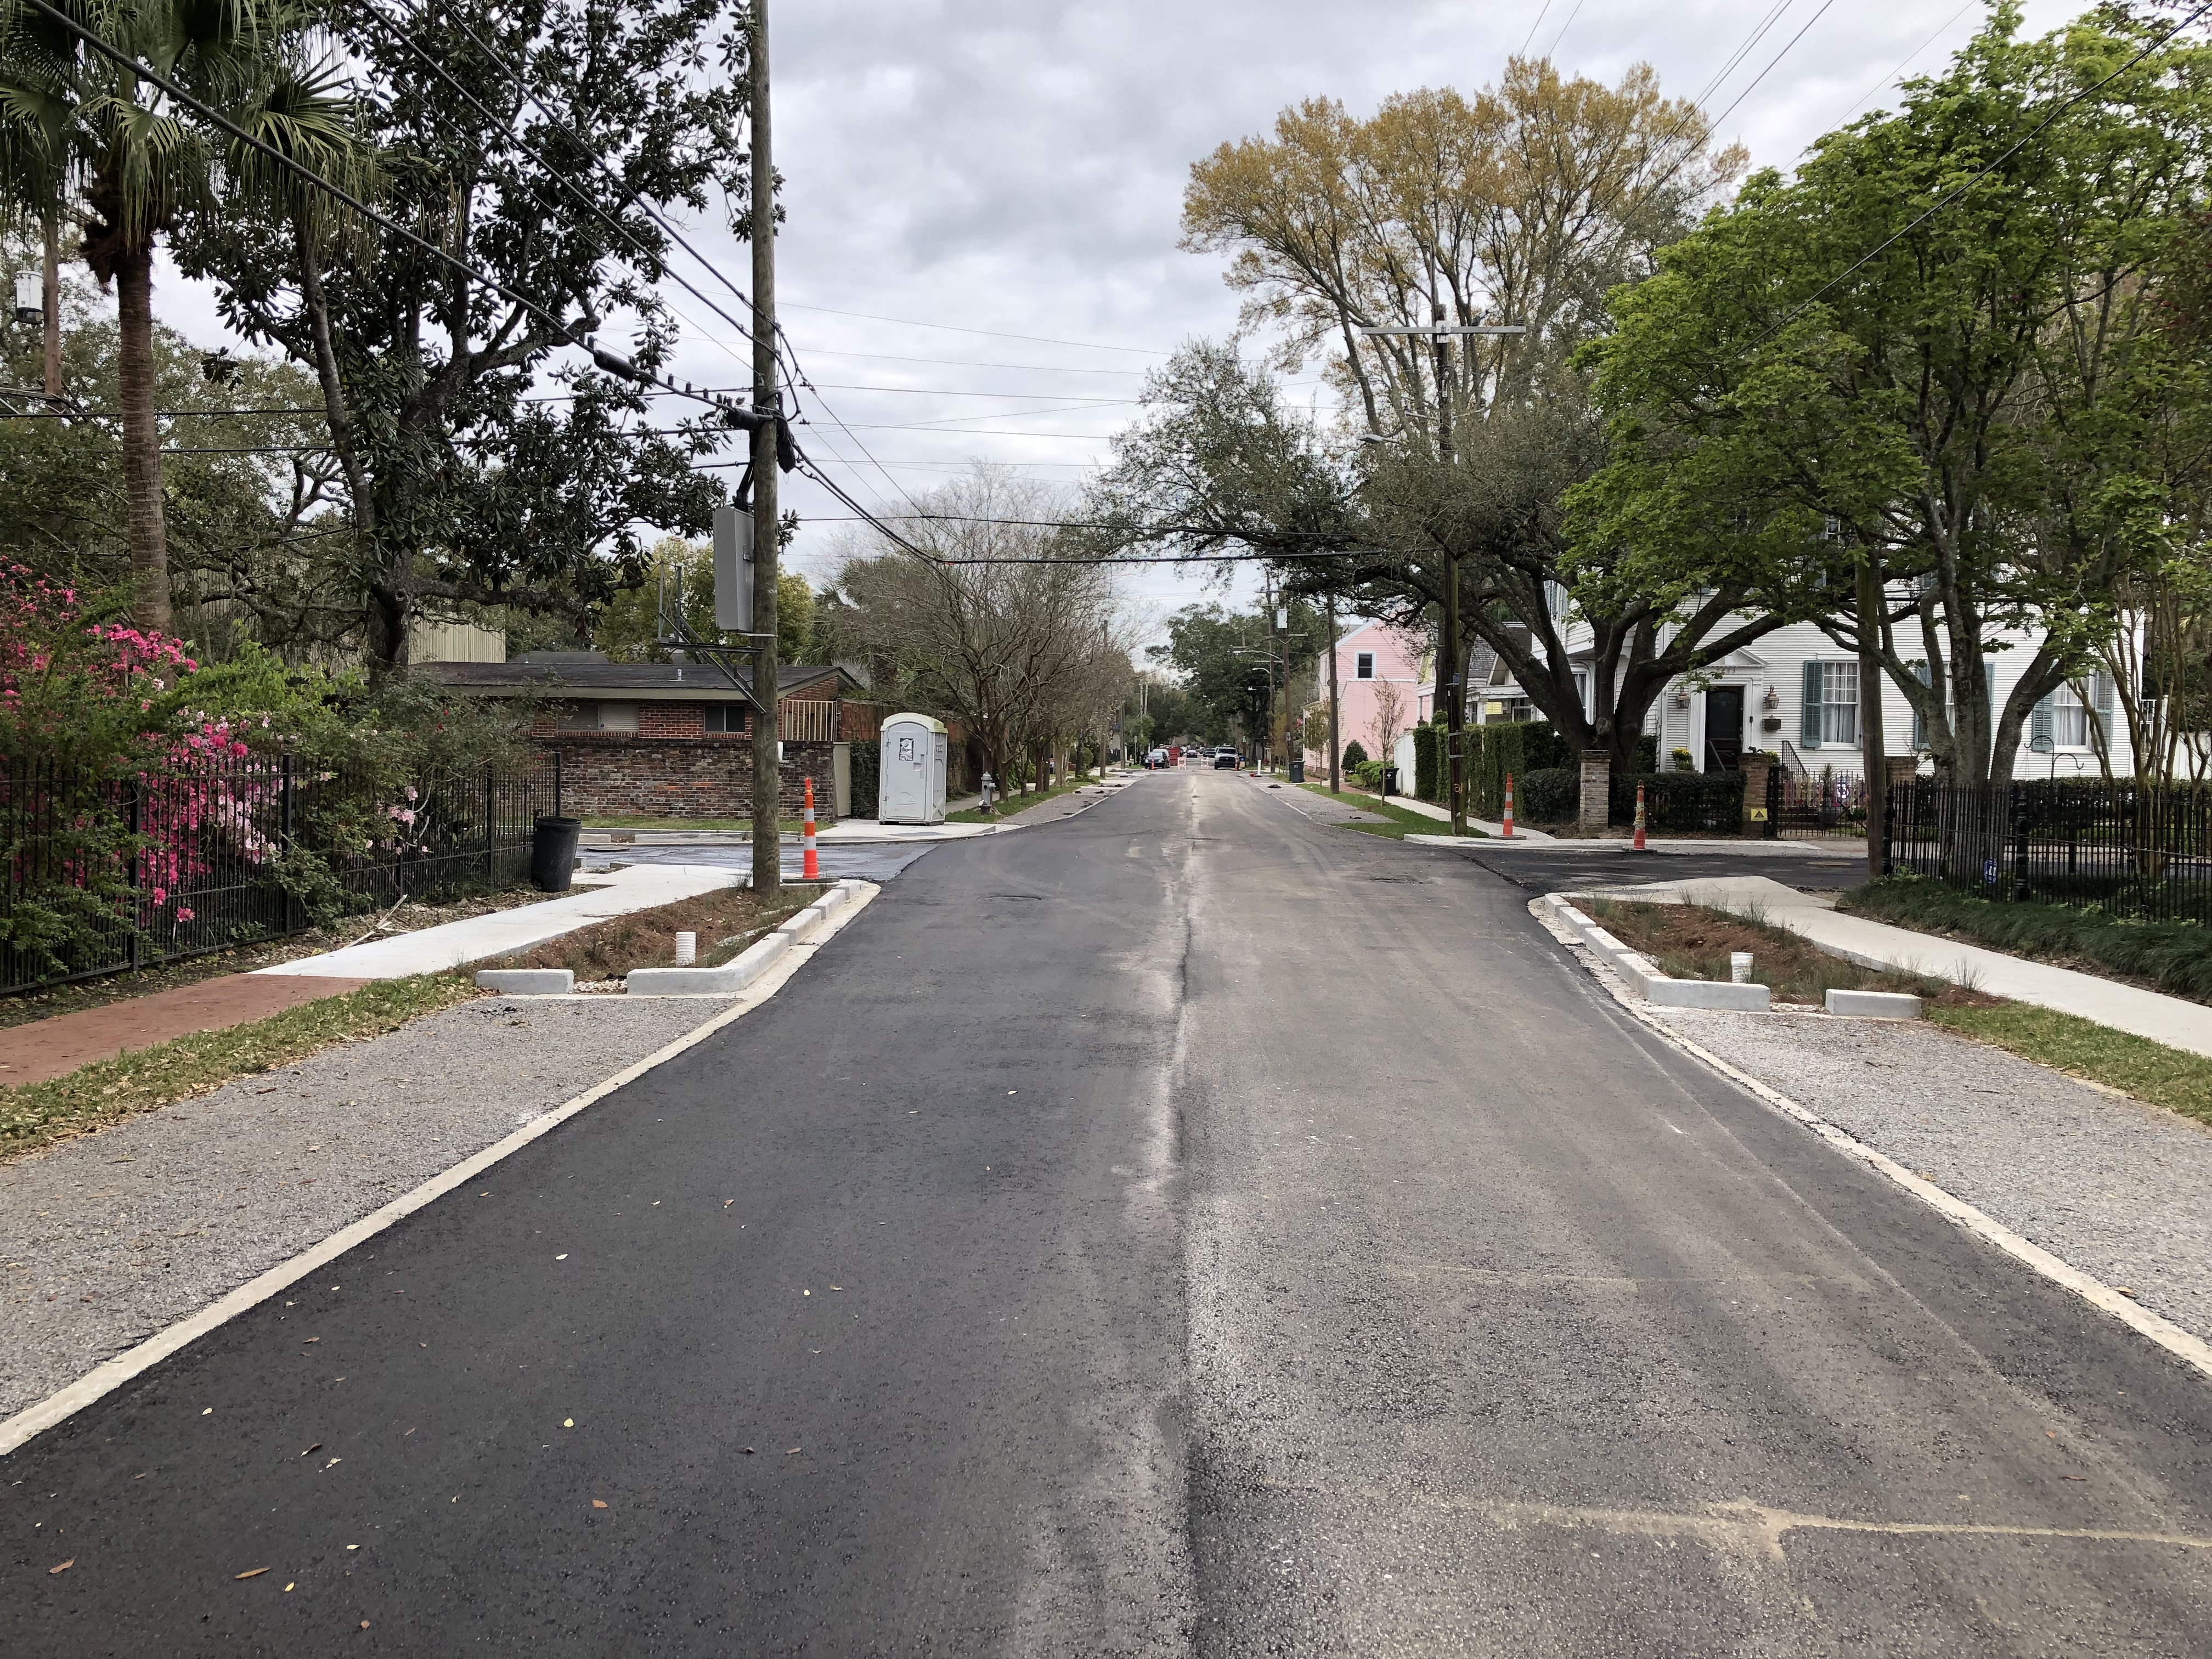 CHEROKEE STREET DRAINAGE IMPROVEMENT PROJECT SUBSTANTIALLY COMPLETE